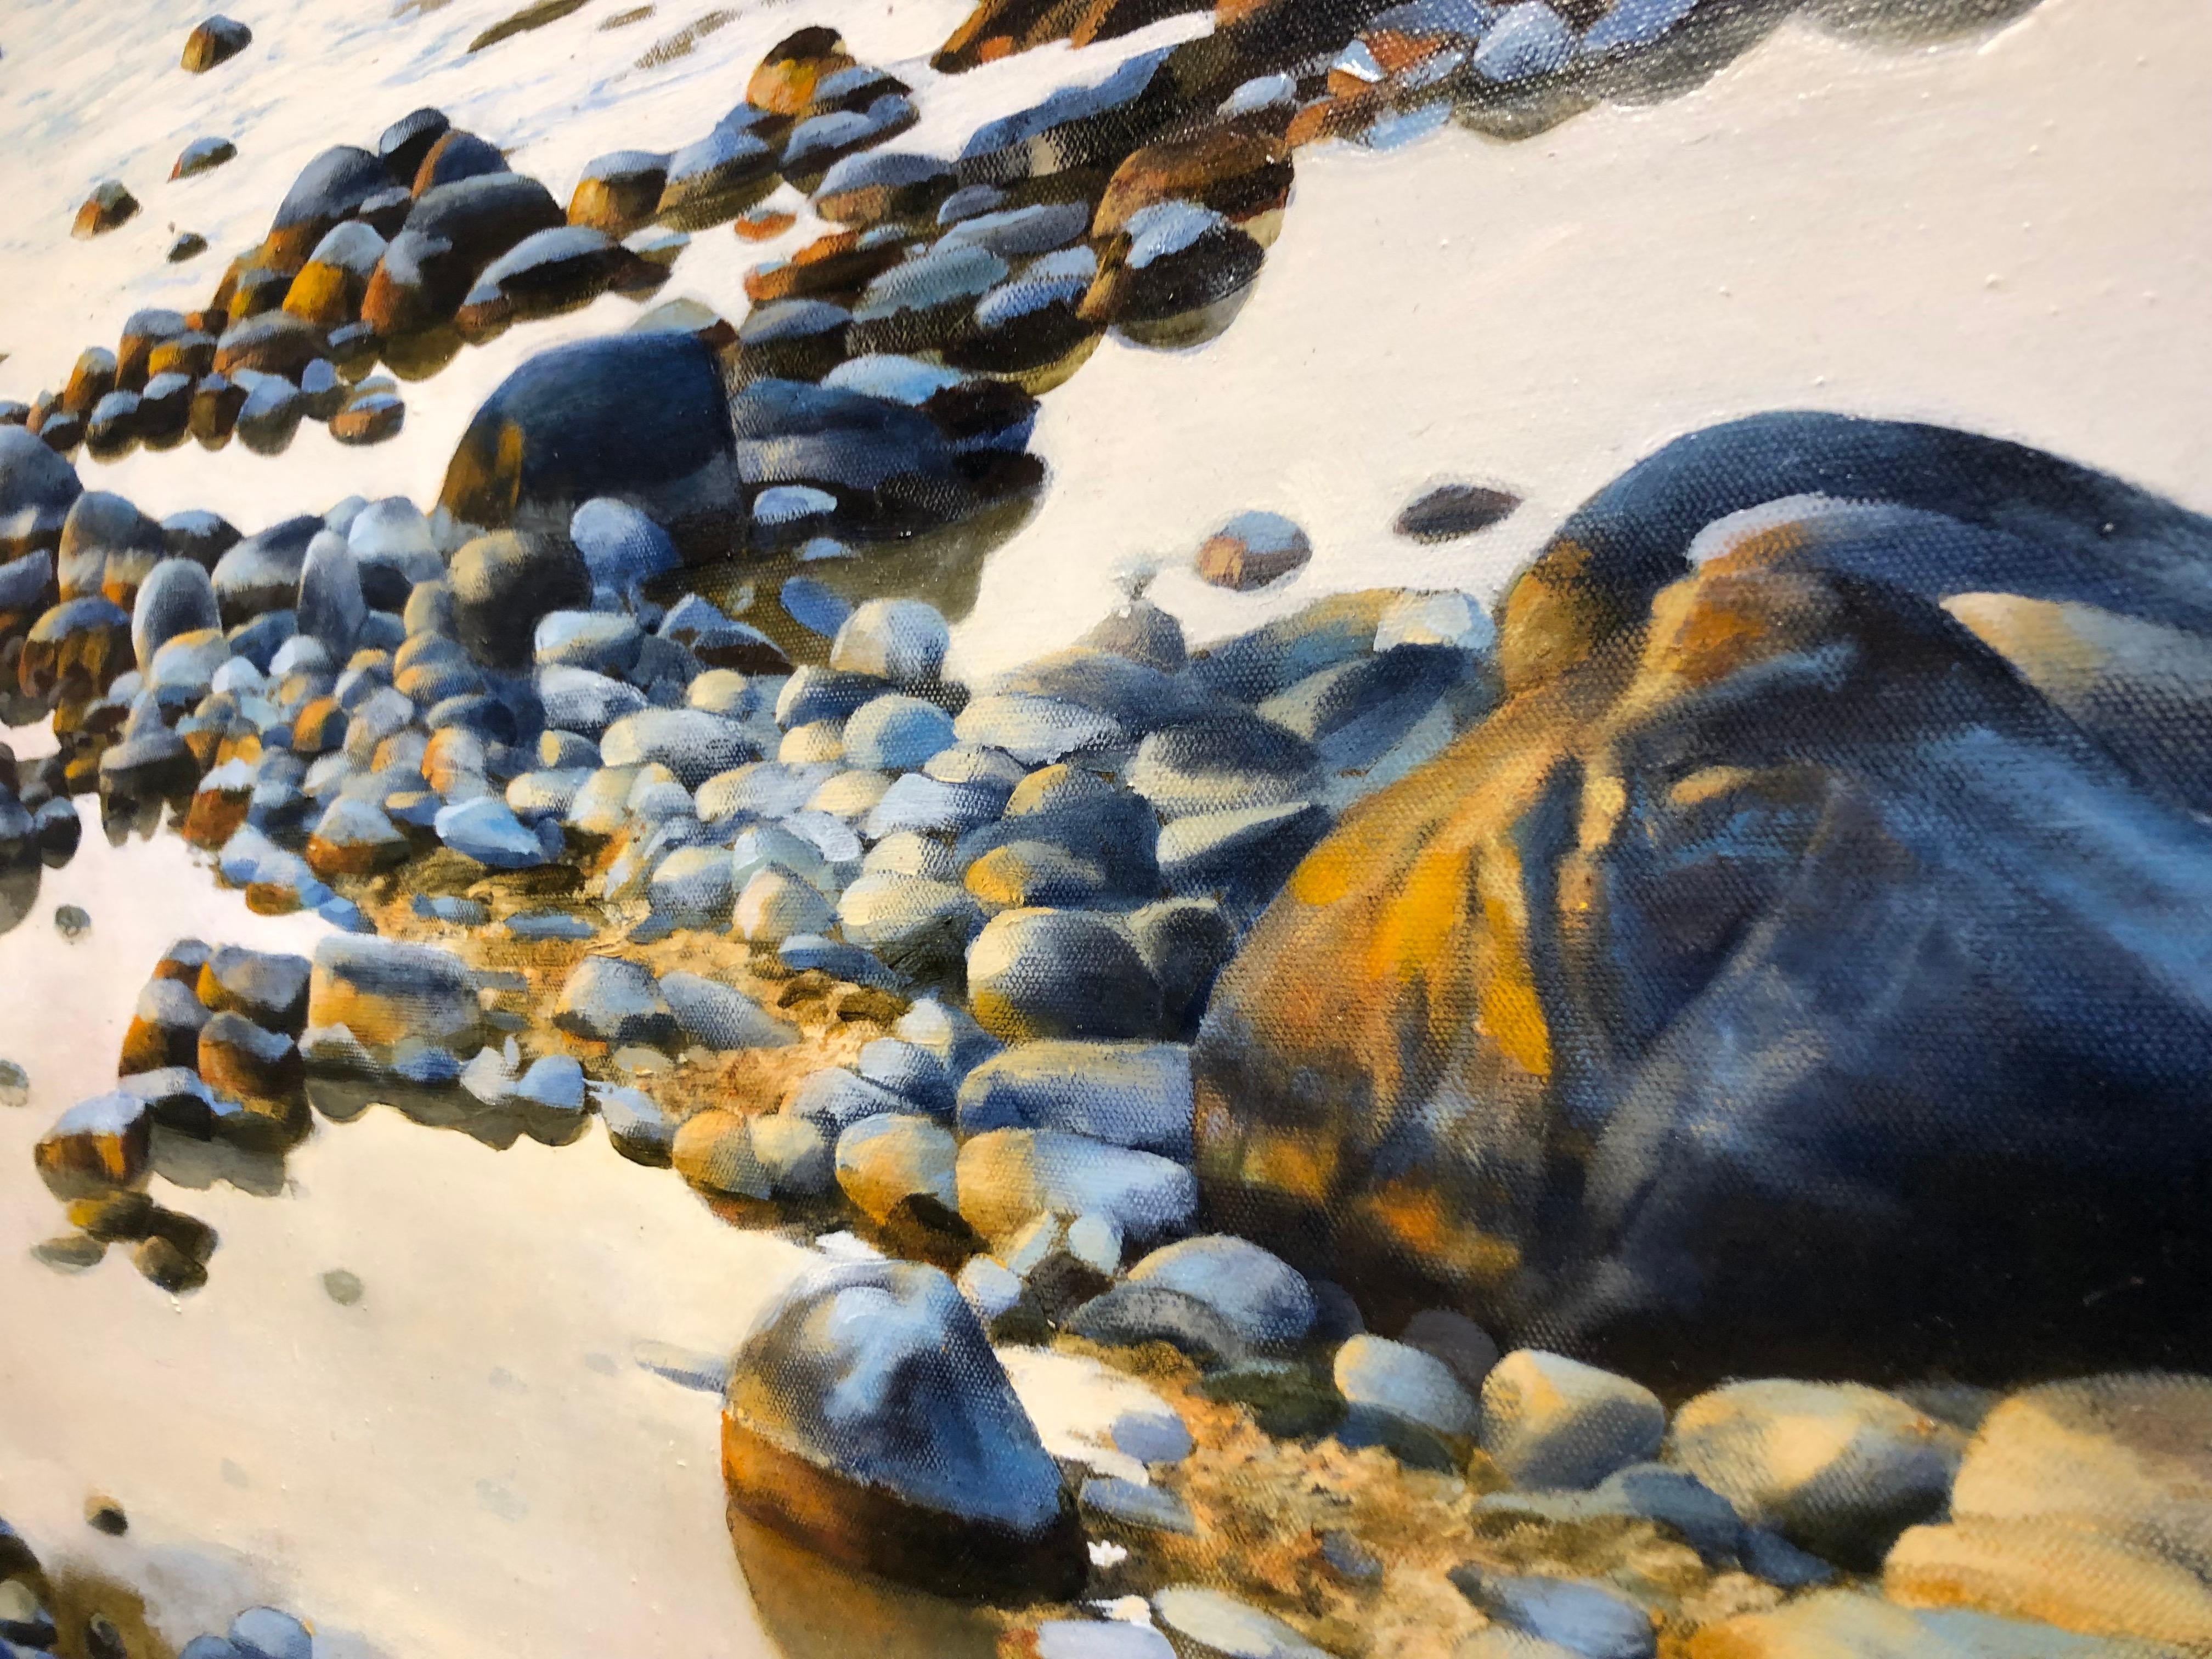 Song of Stones, Rocky Beach of Northern Michigan, Original Oil on Canvas 3